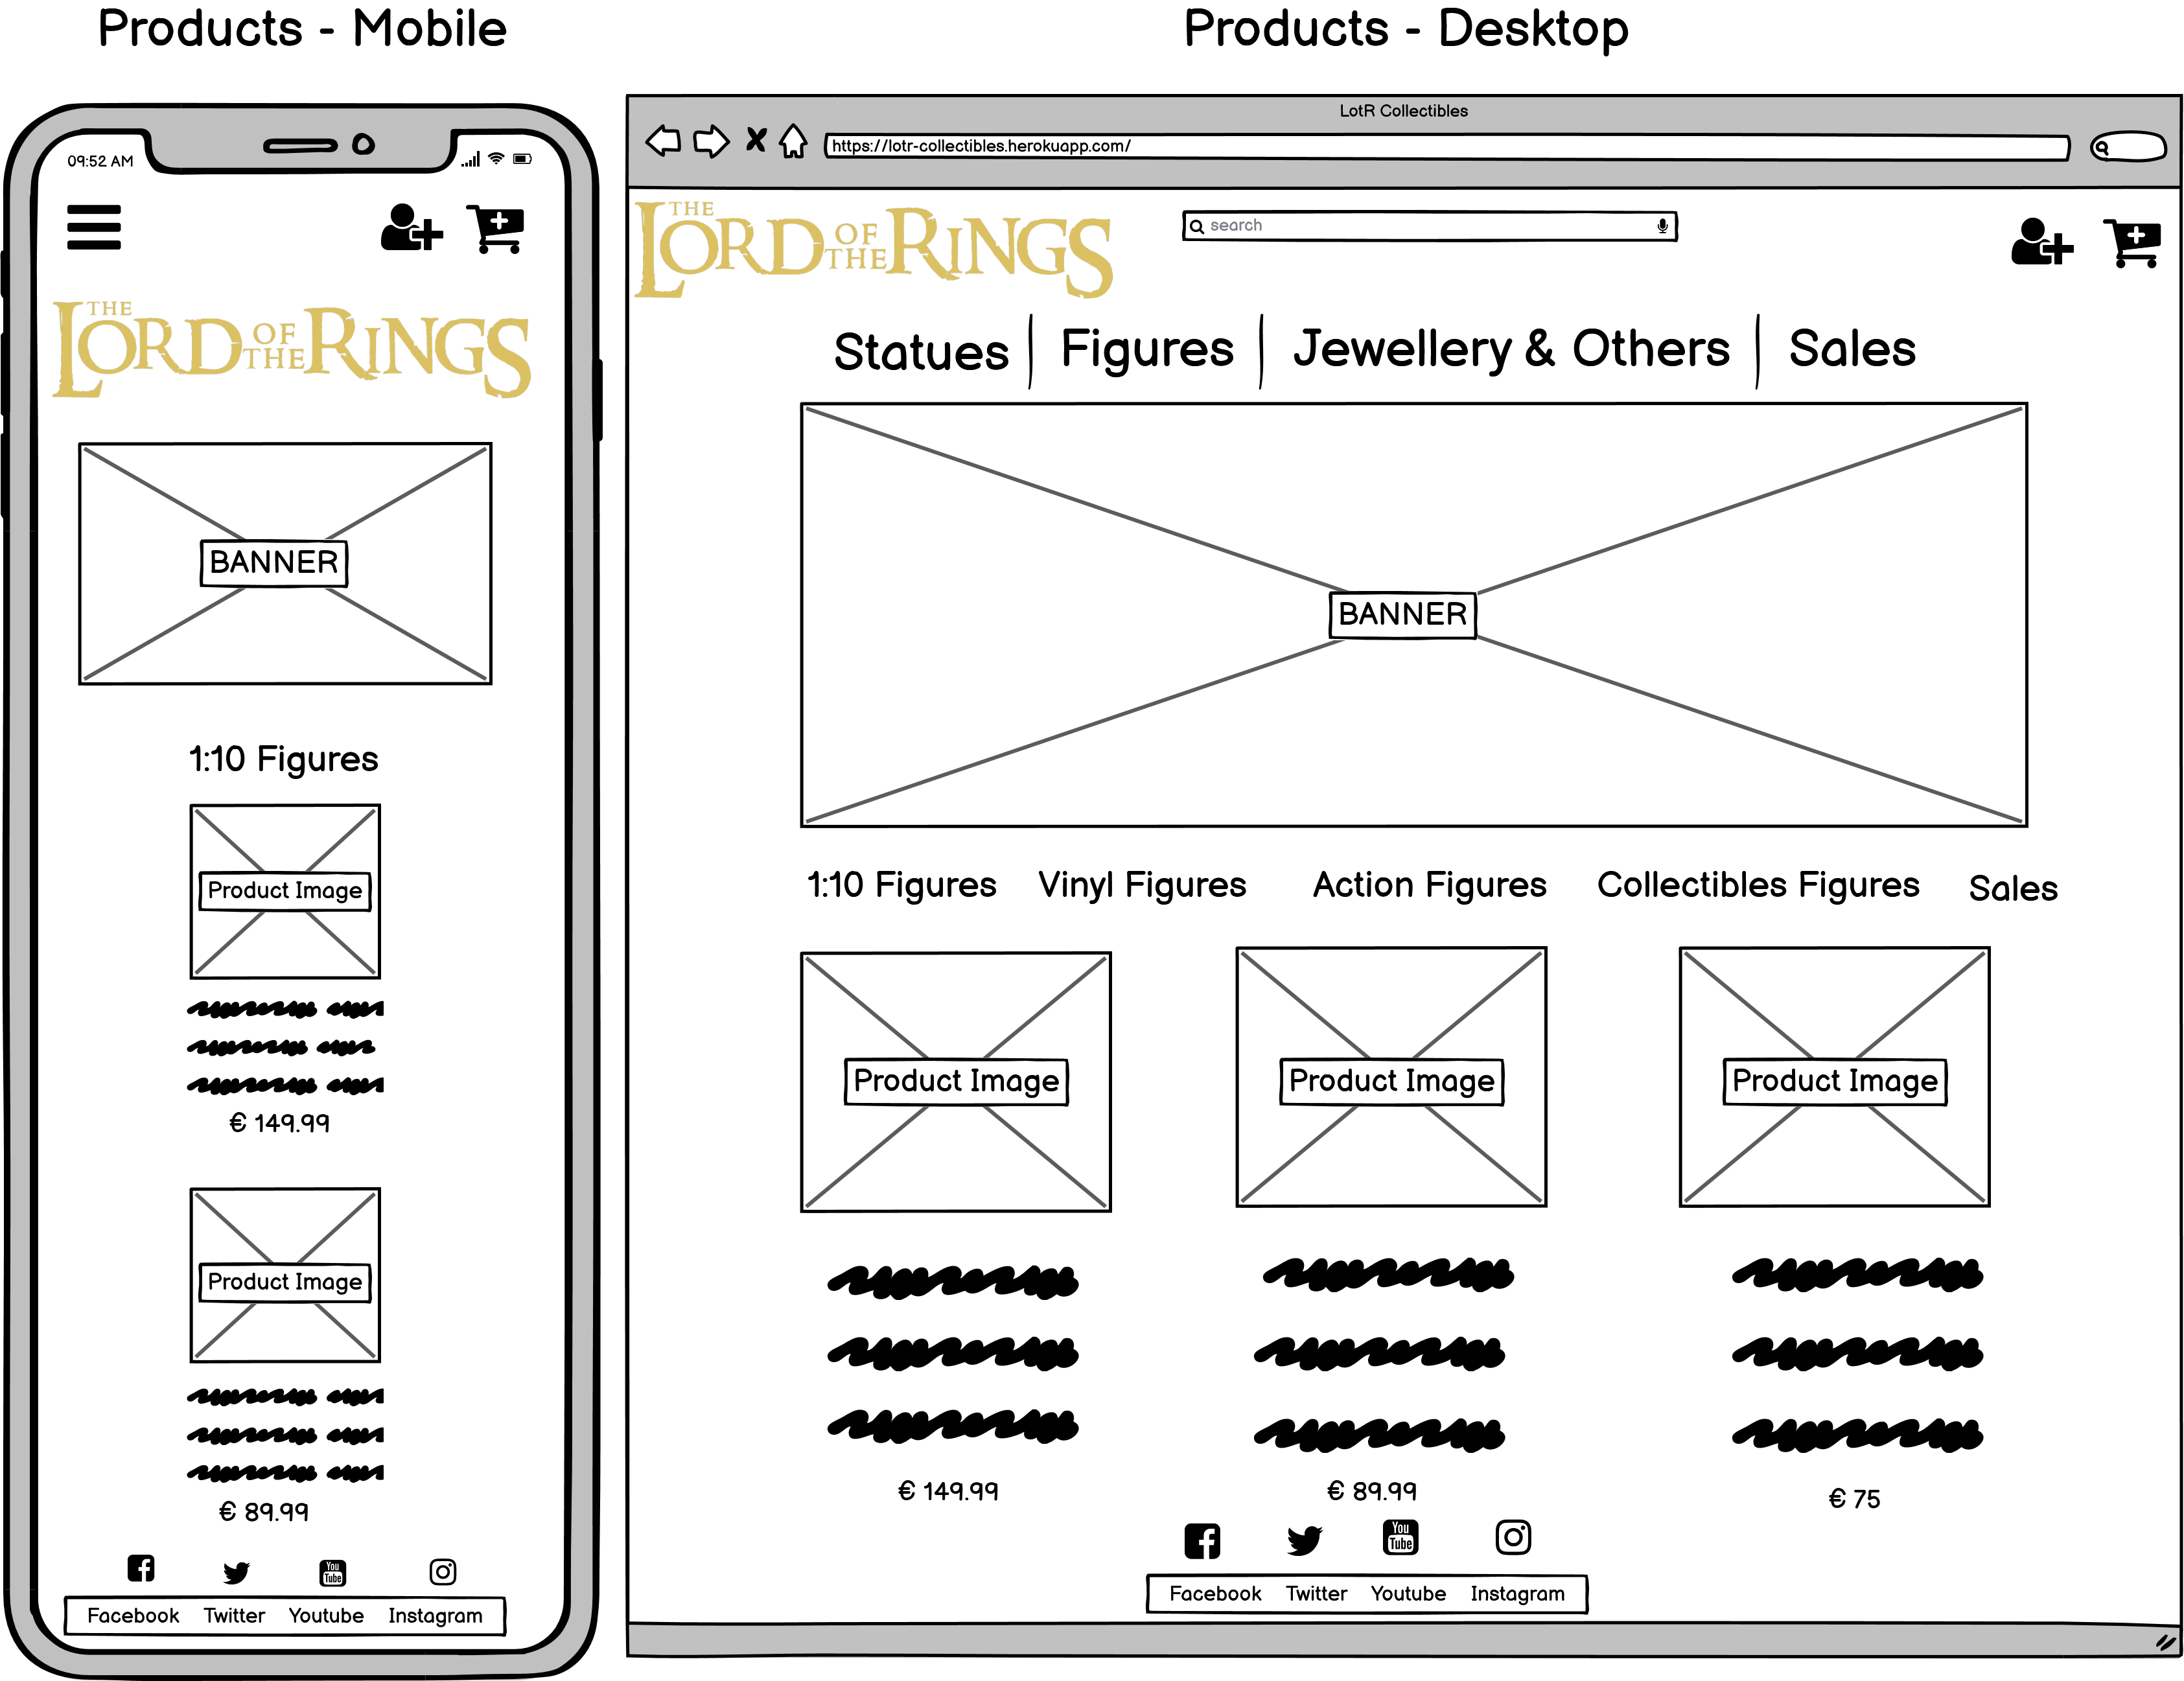 Wireframe: Products